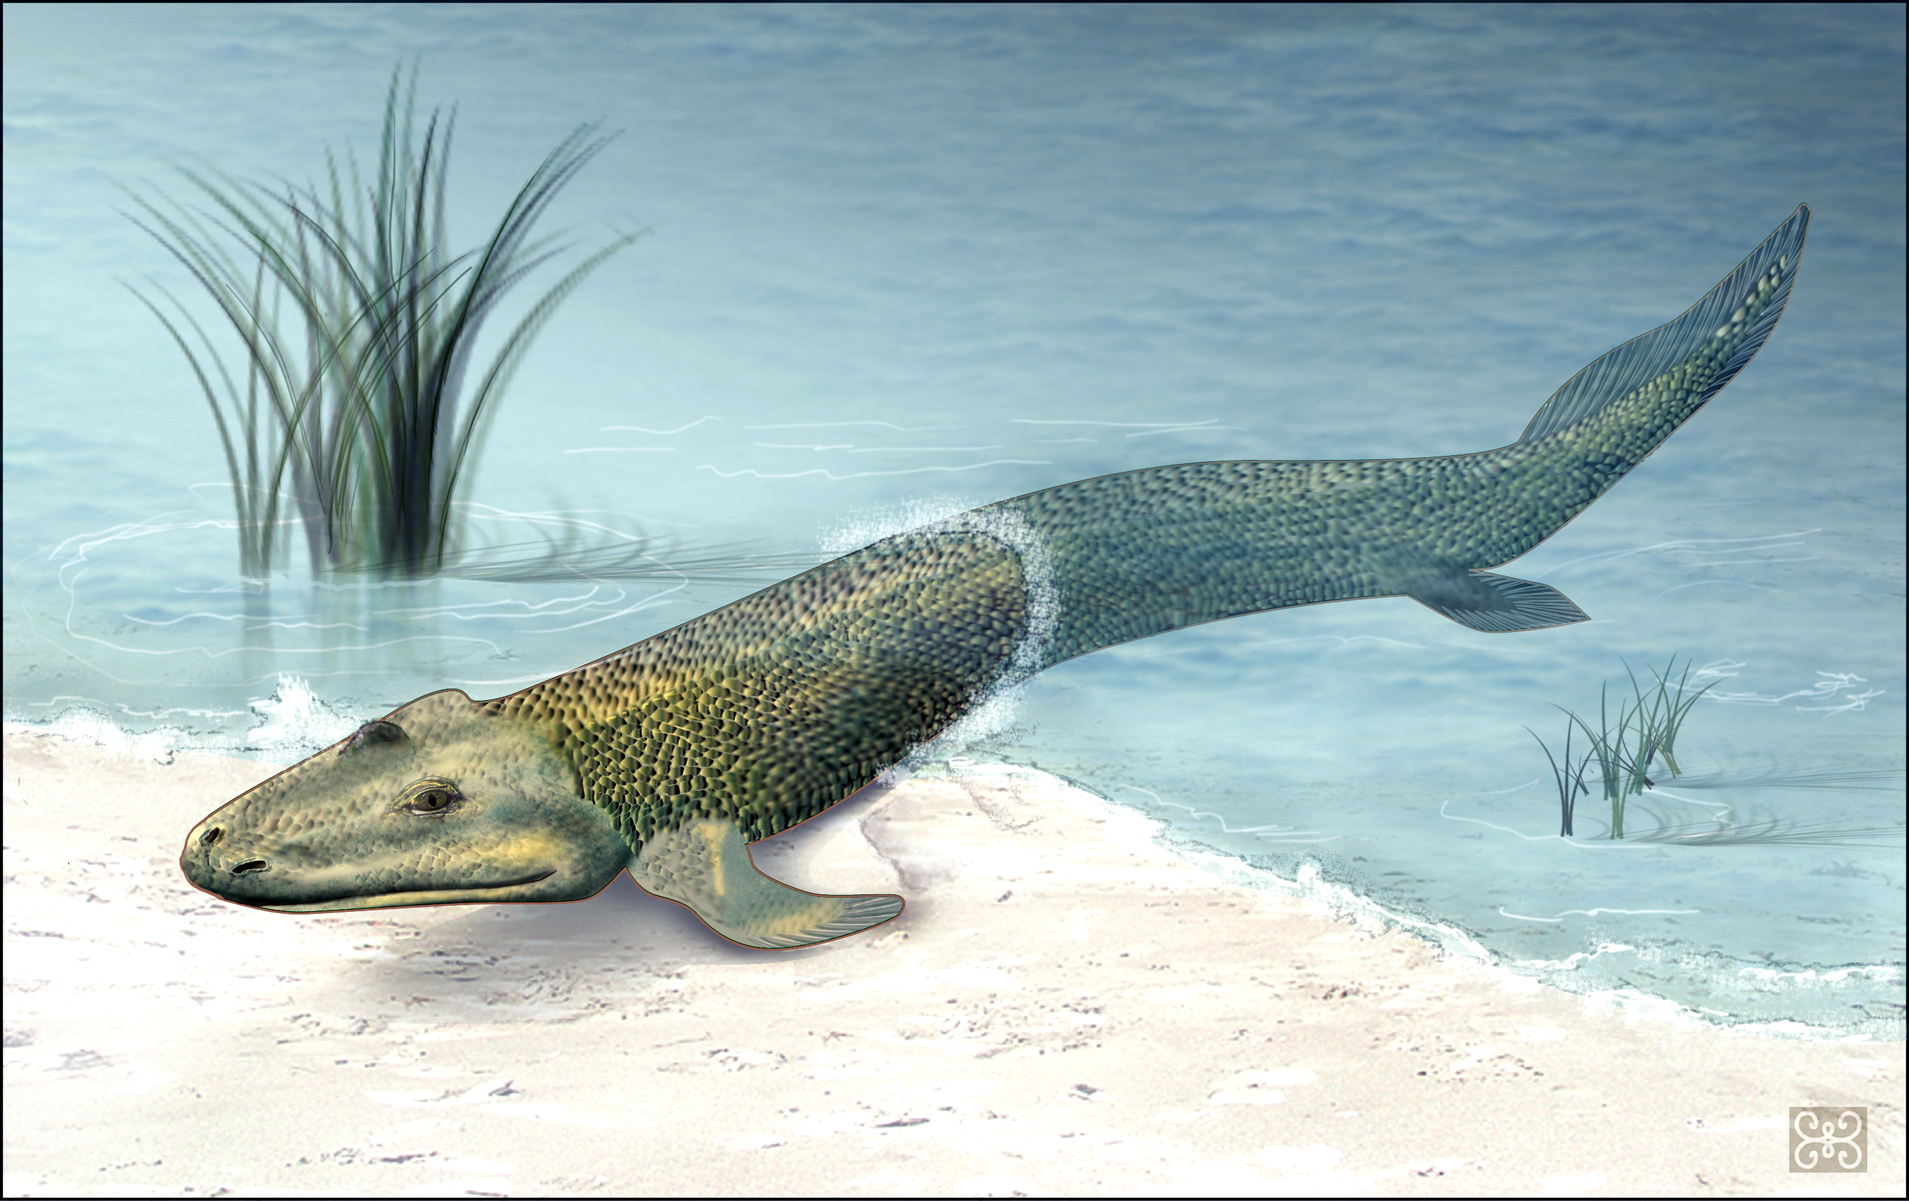 This scientific illustration shows a fossil fish, Tiktaalik roseae, with a flat head and long, greenish-yellow body. The fish has two pairs of fins, the front of which are resting on sand while the back fins are in water. The fish is half on land and half in water to represent its transition point in evolution.